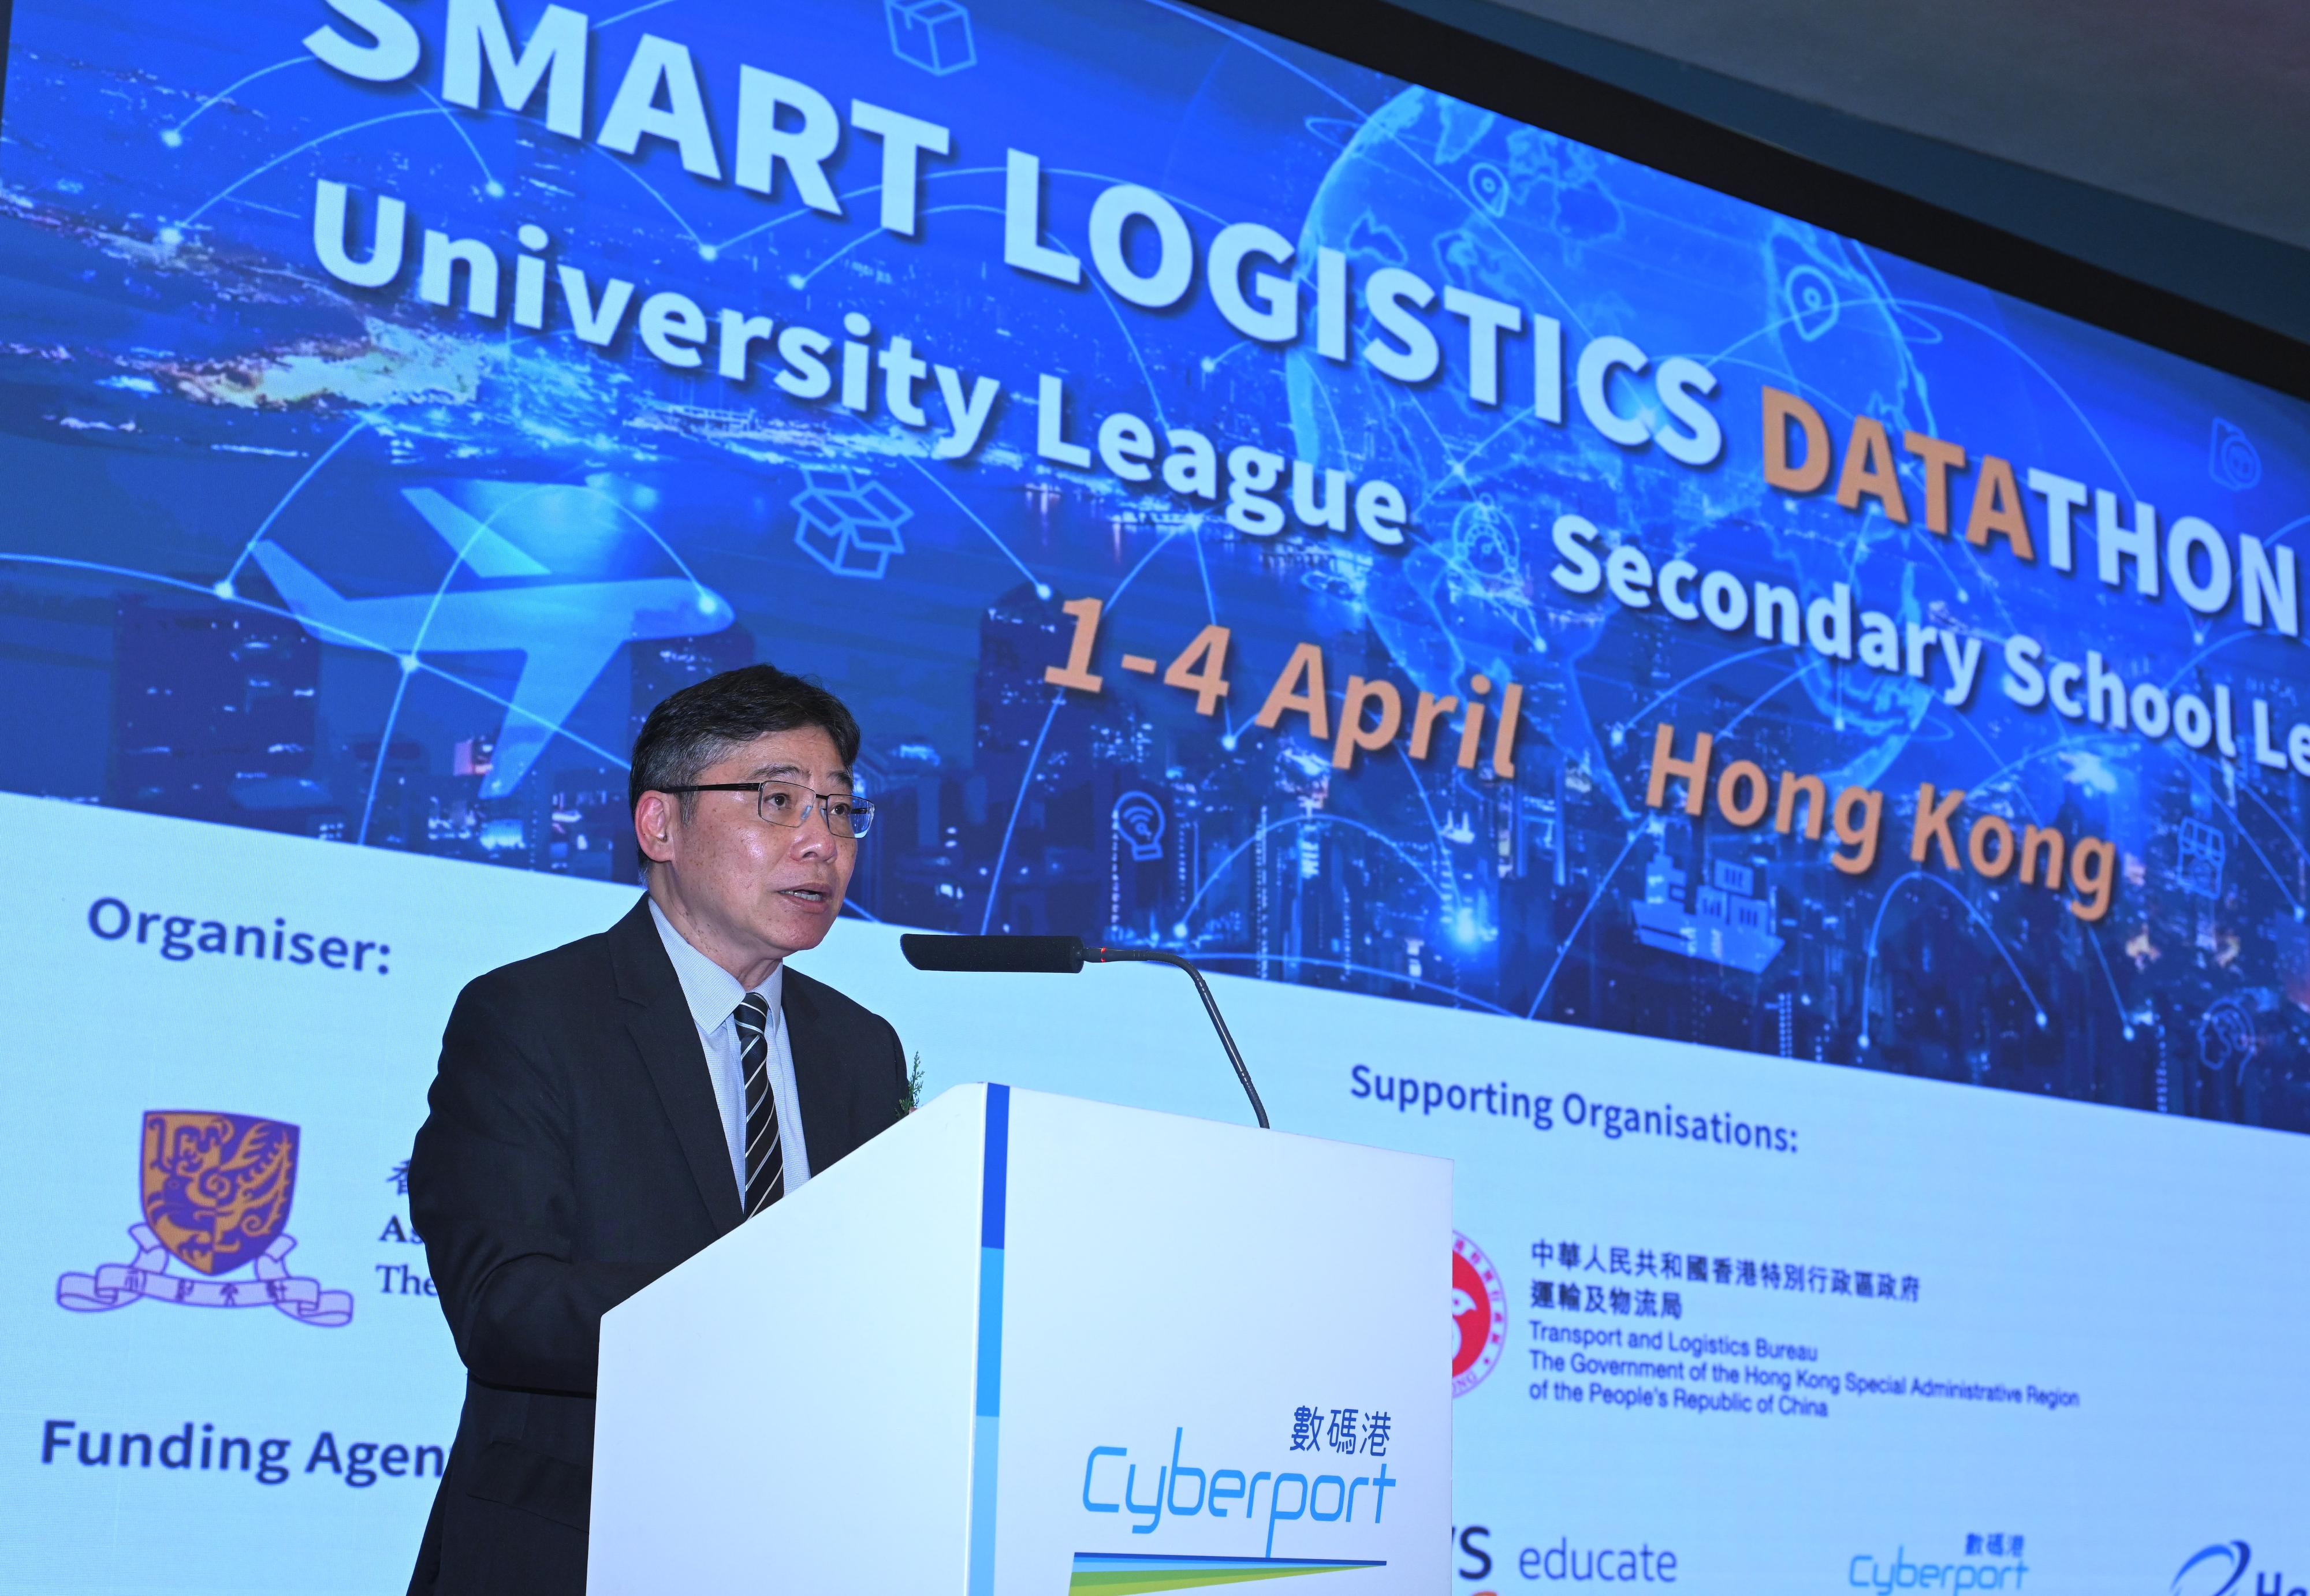 The Smart Logistics Datathon 2024 officially started today (April 2). Photo shows the Secretary for Transport and Logistics, Mr Lam Sai-hung, speaking at the opening ceremony. 